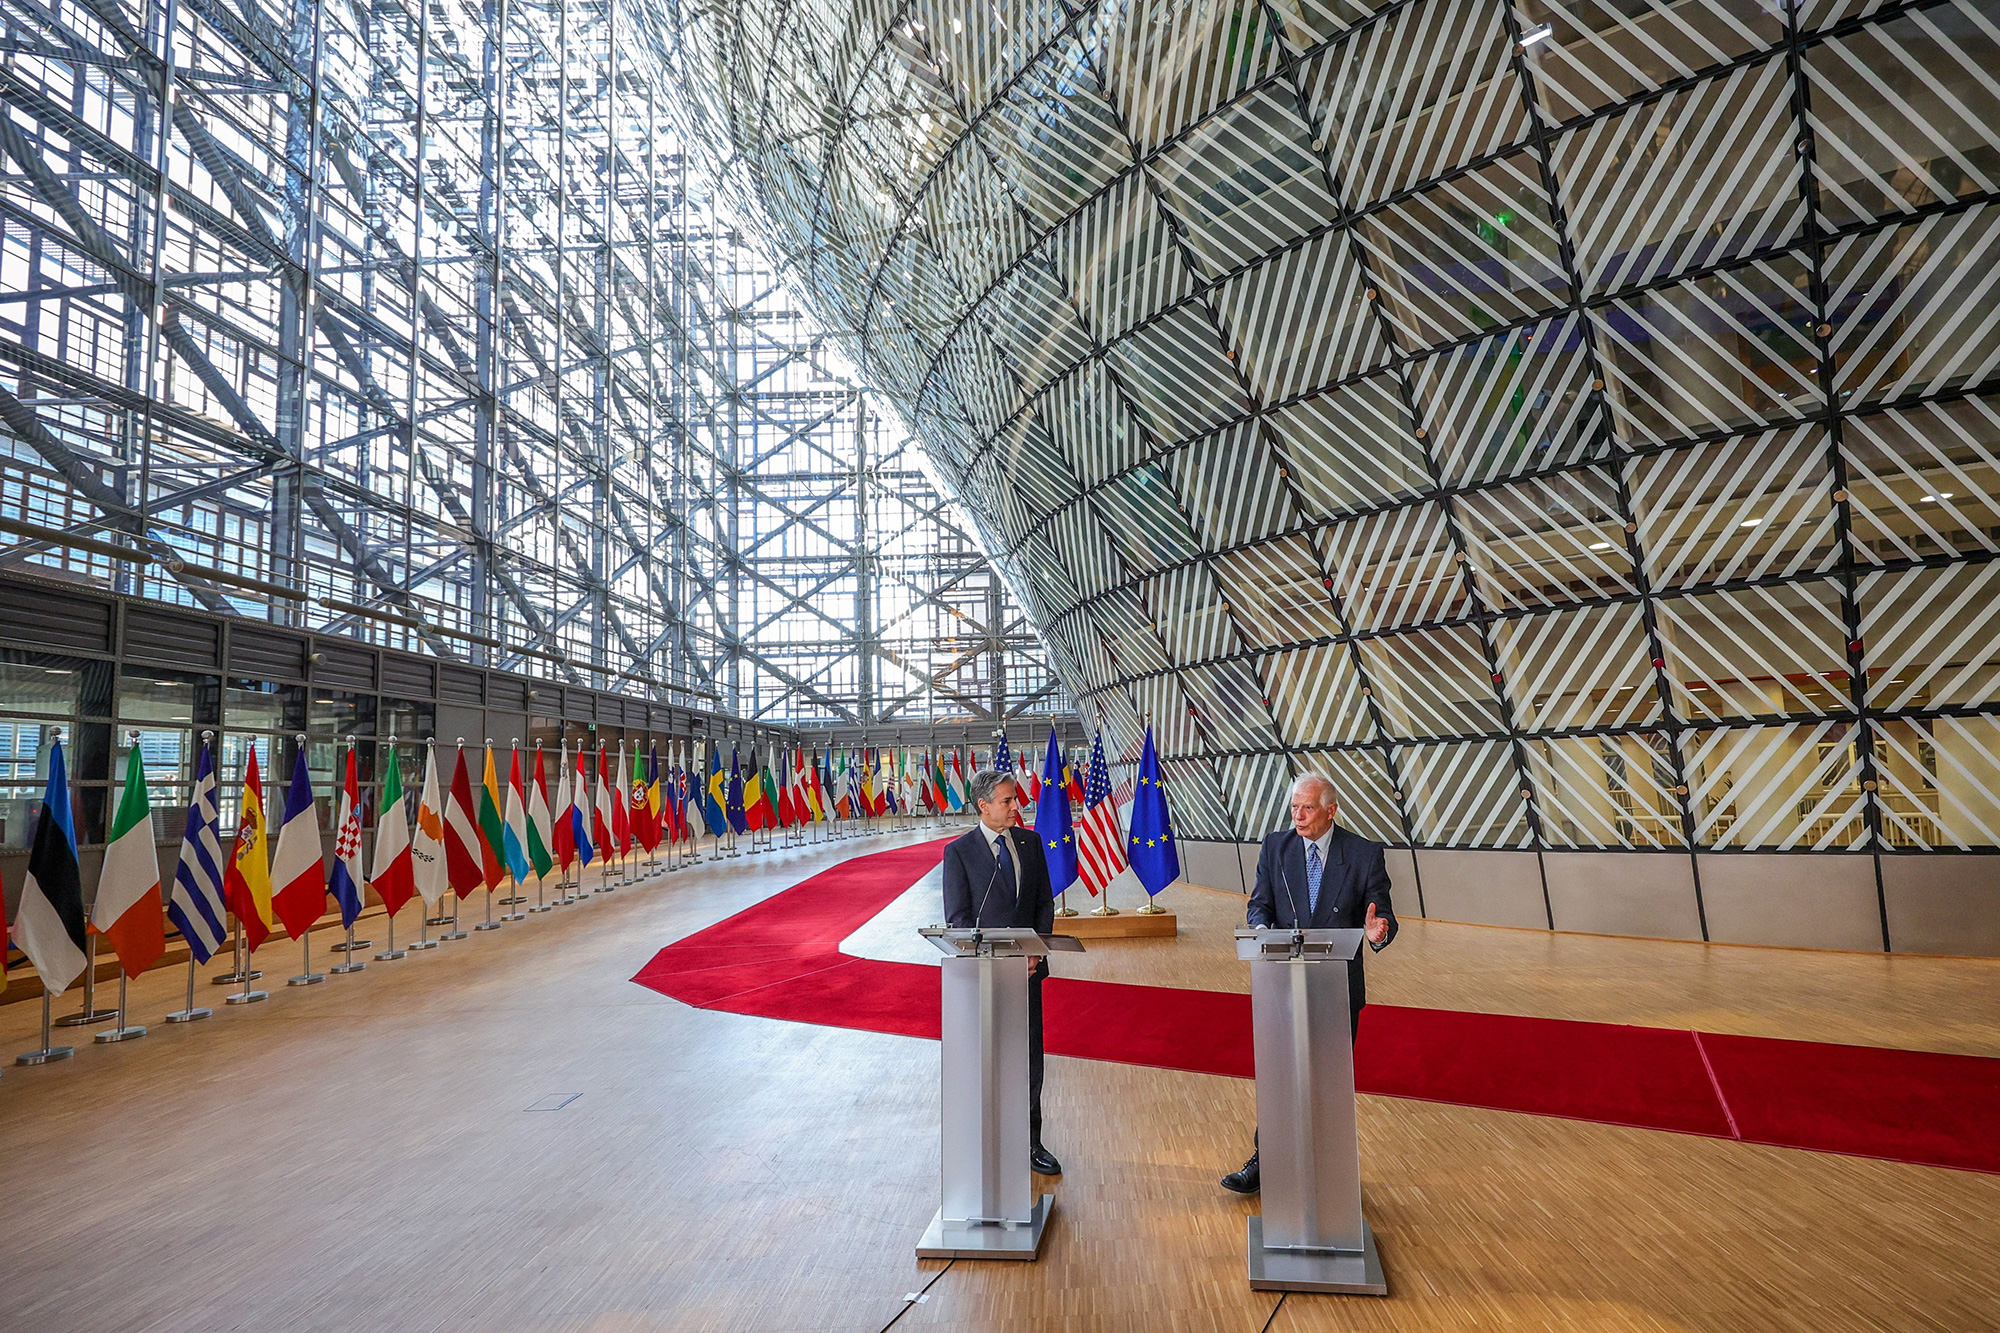 US Secretary of State Antony Blinken, left, and European Union High Representative for Foreign Affairs and Security Policy Josep Borrell speak to the press ahead of an EU-US Energy Council ministerial meeting in Brussels on Tuesday, April 4.